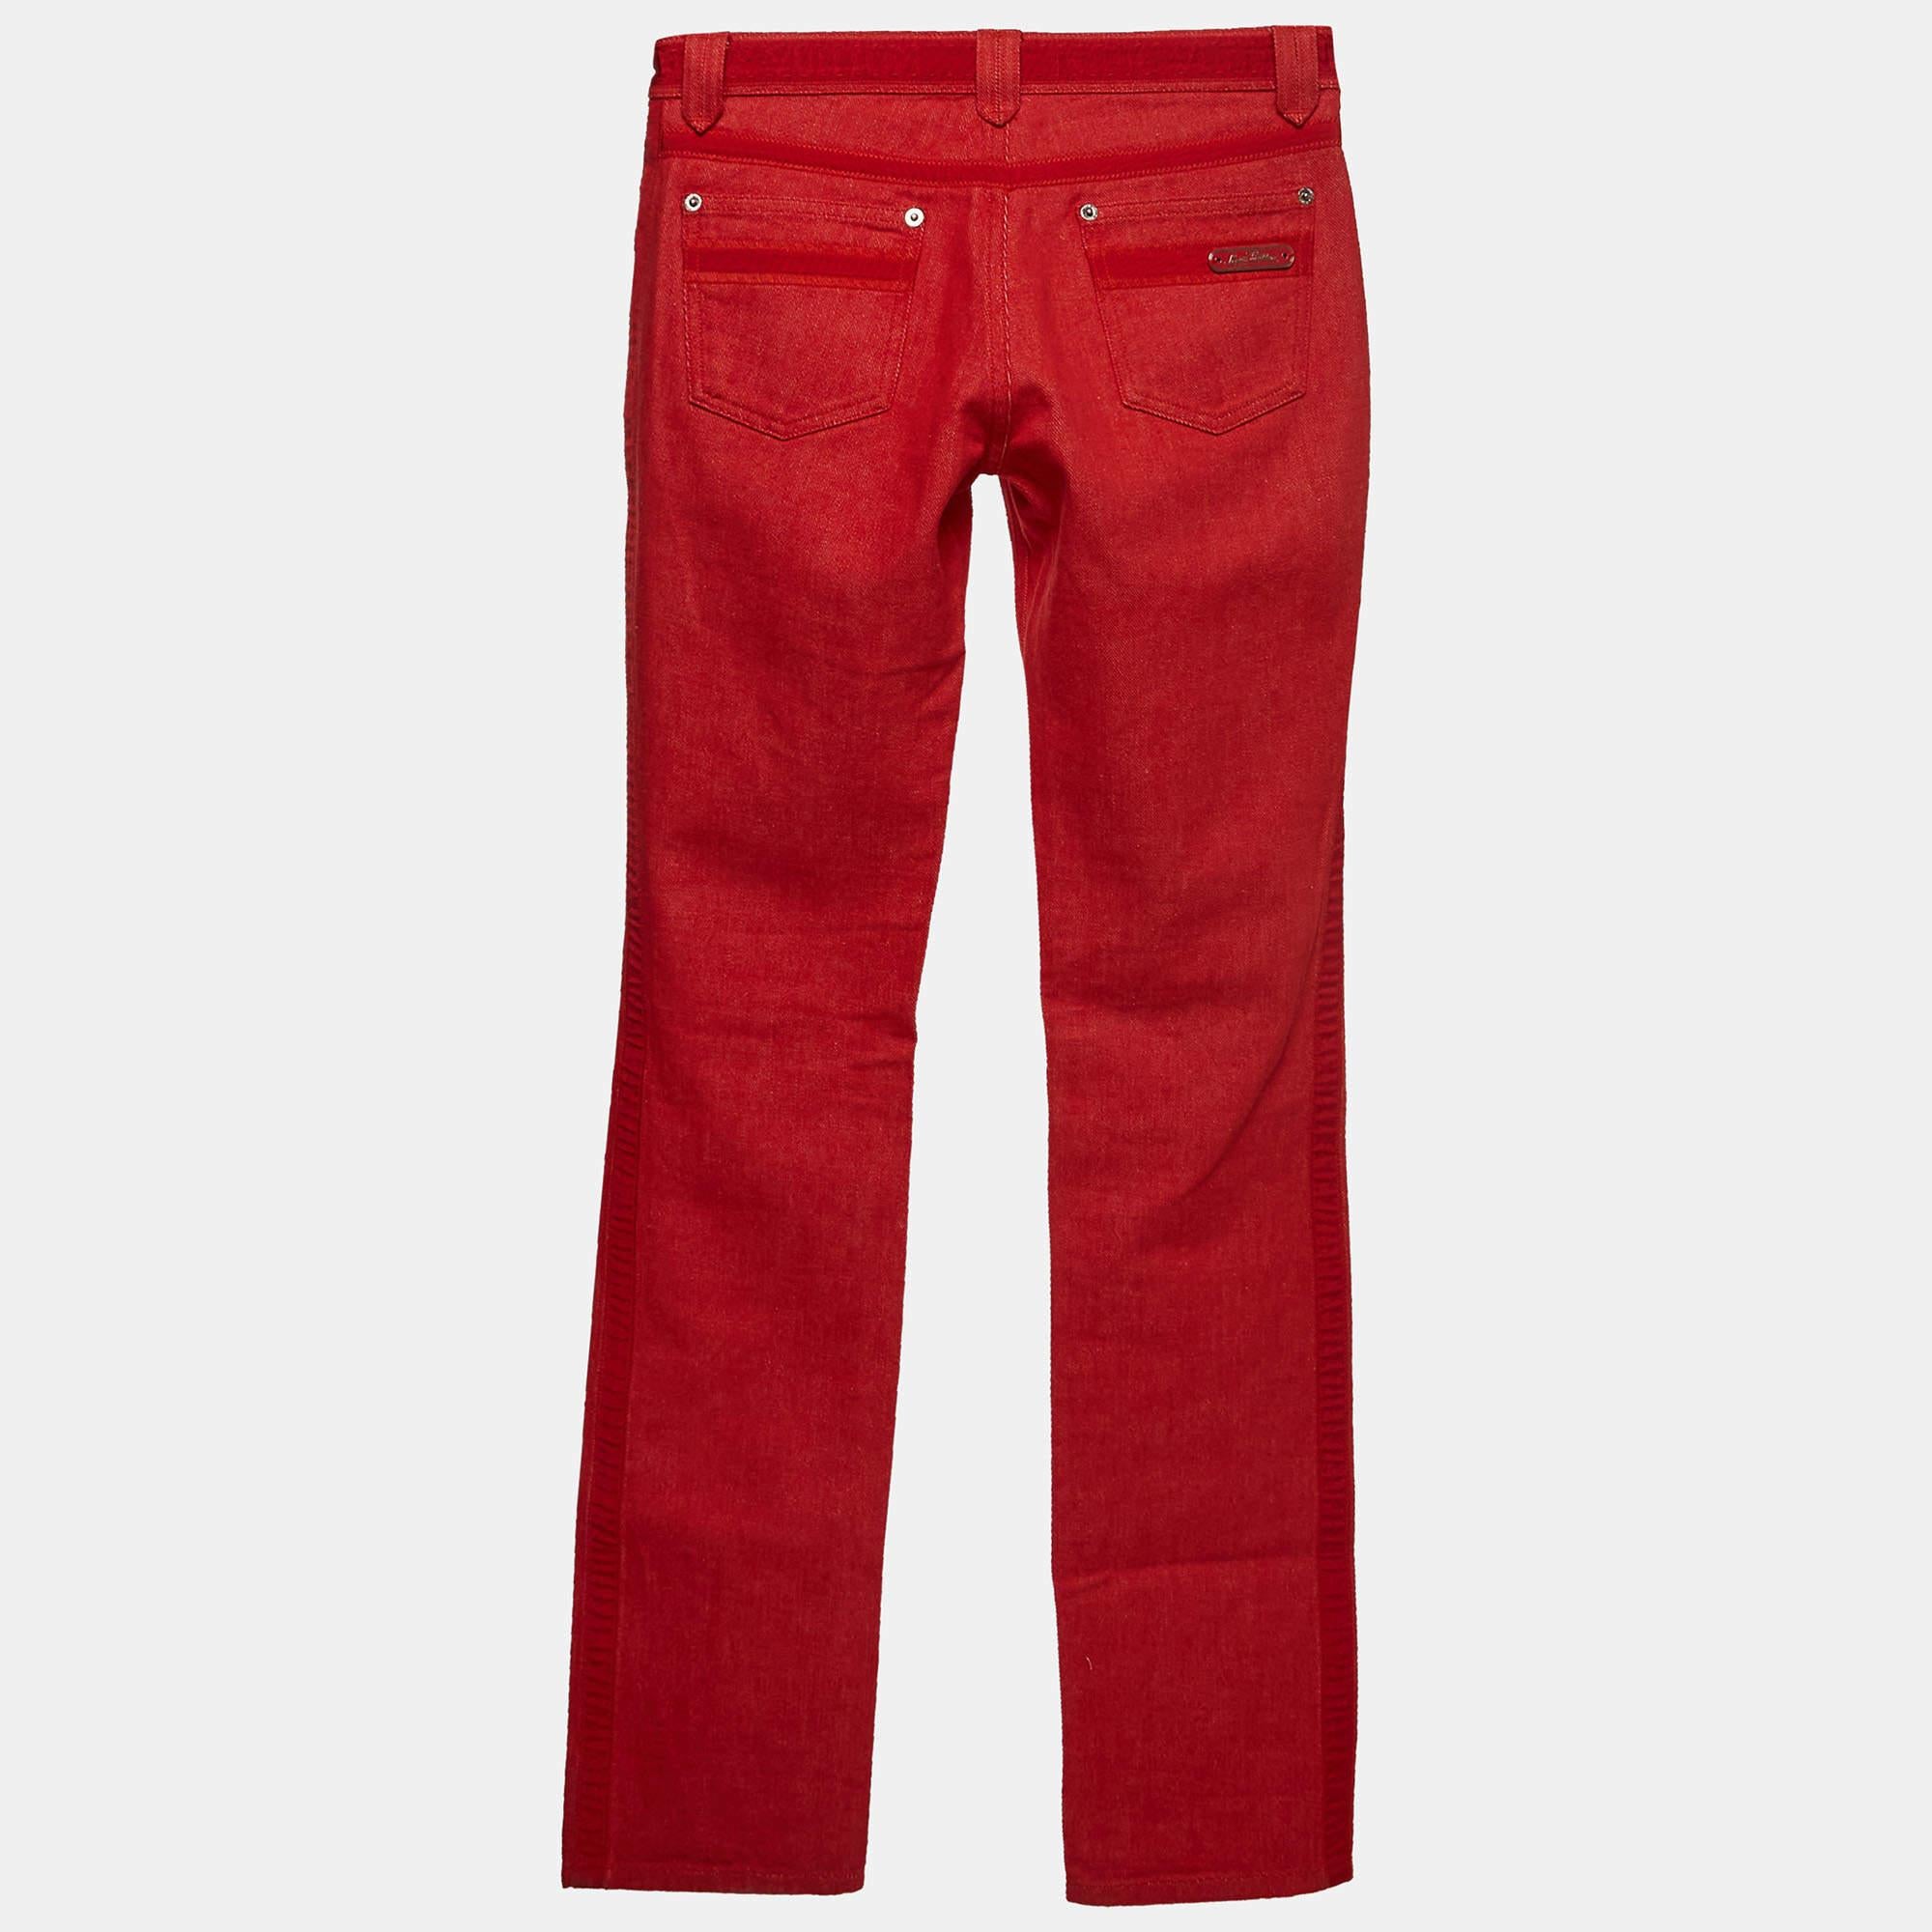 Pick these jeans from Louis Vuitton and feel absolutely stylish. They have been skillfully stitched using high-quality fabric and flaunt a superb fit. Pair these jeans with your favorite sneakers as you head out for the day.

Includes: Brand Tag